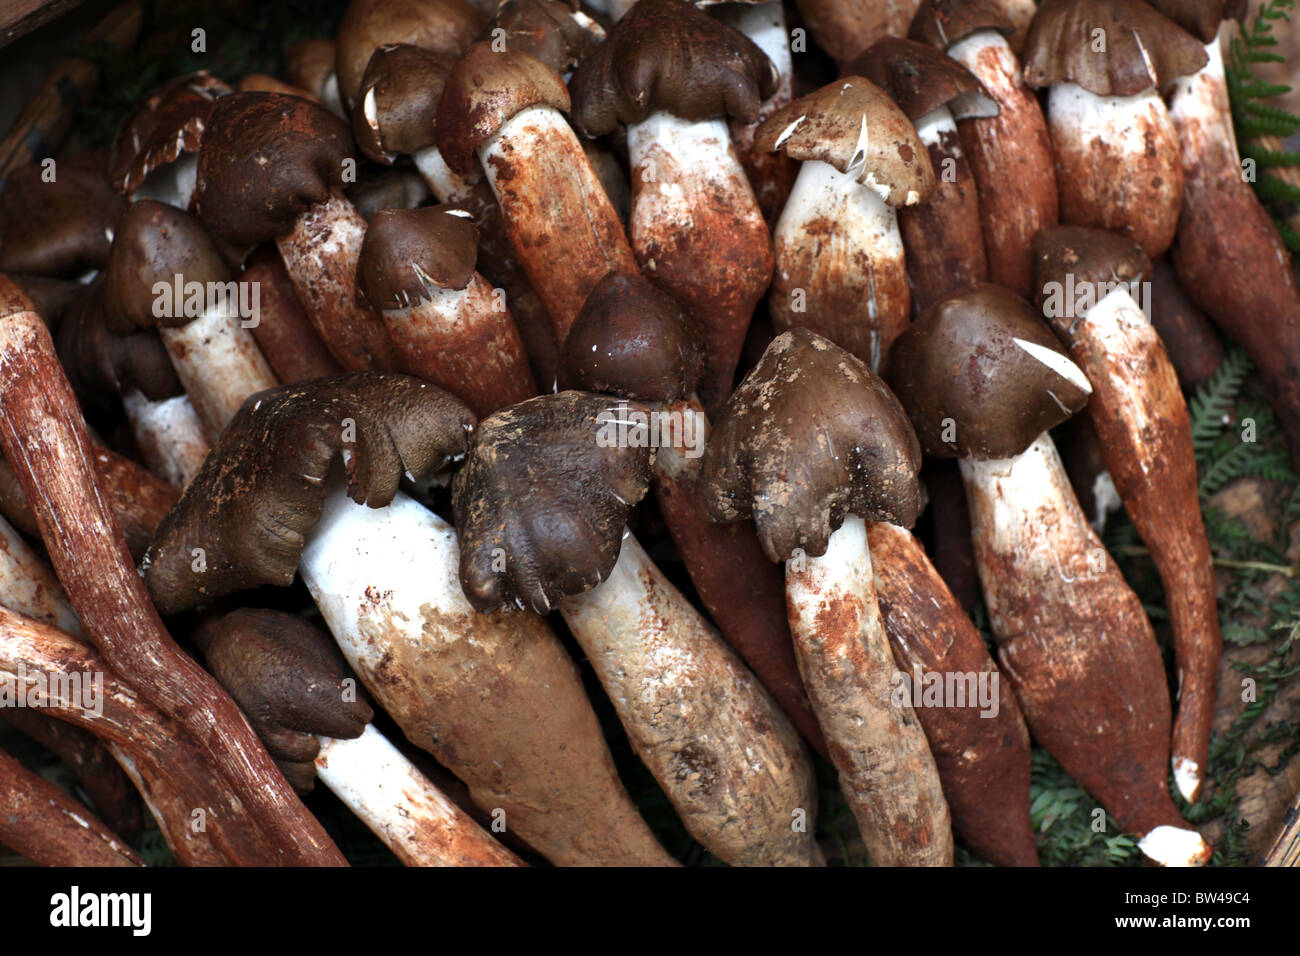 Exotic mushrooms on display at the large local food market in Kunming ...